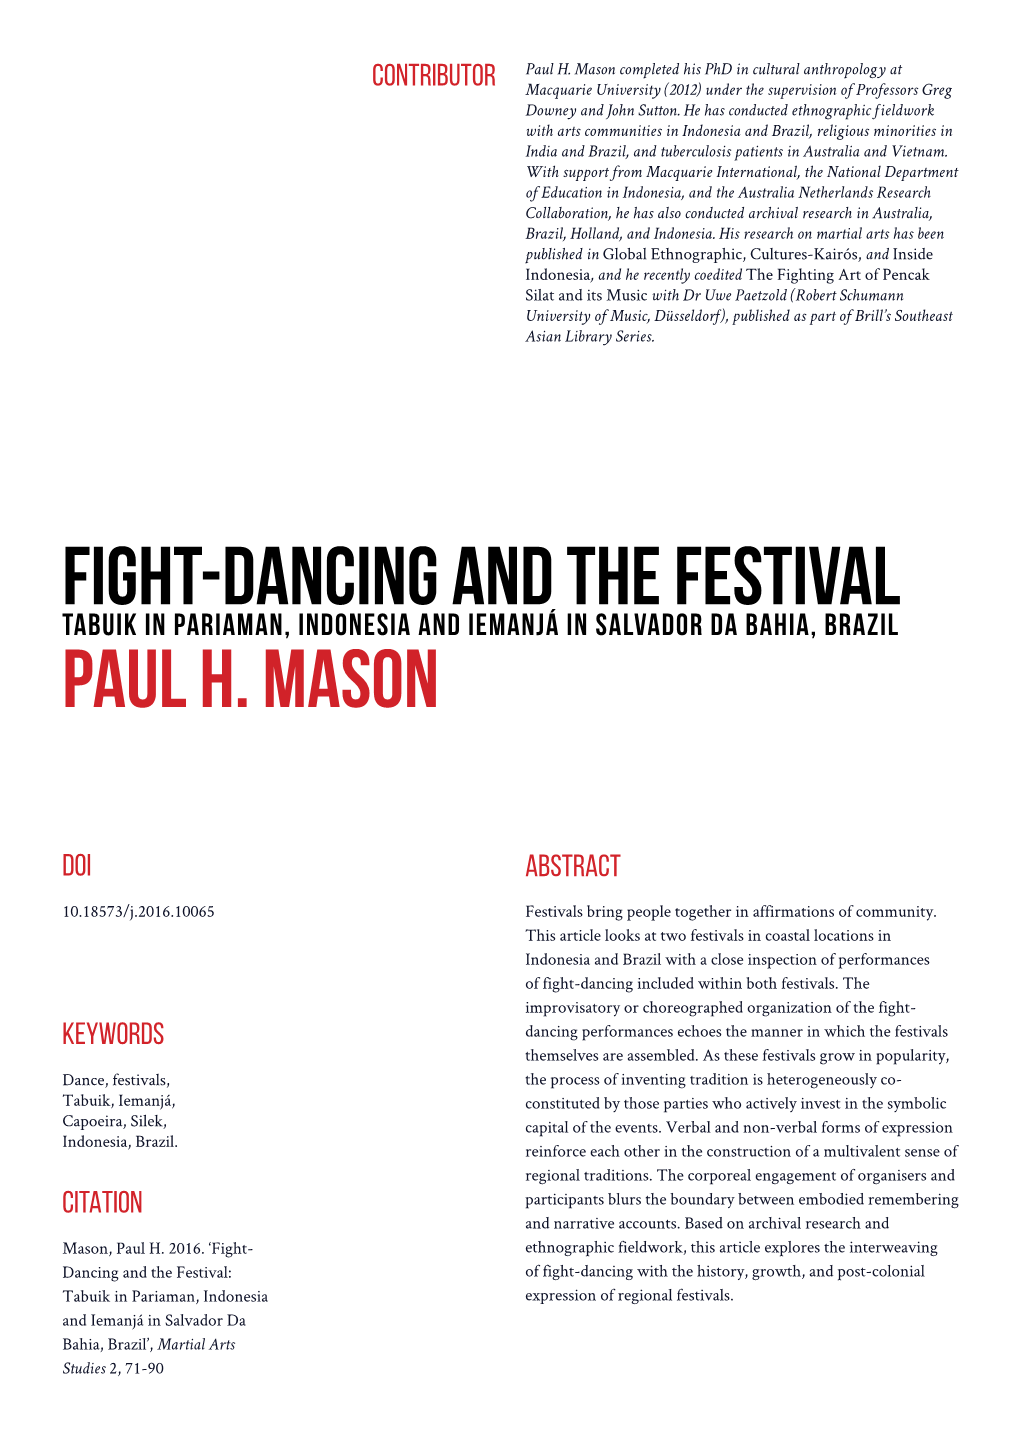 Fight-Dancing and the Festival Paul H. Mason